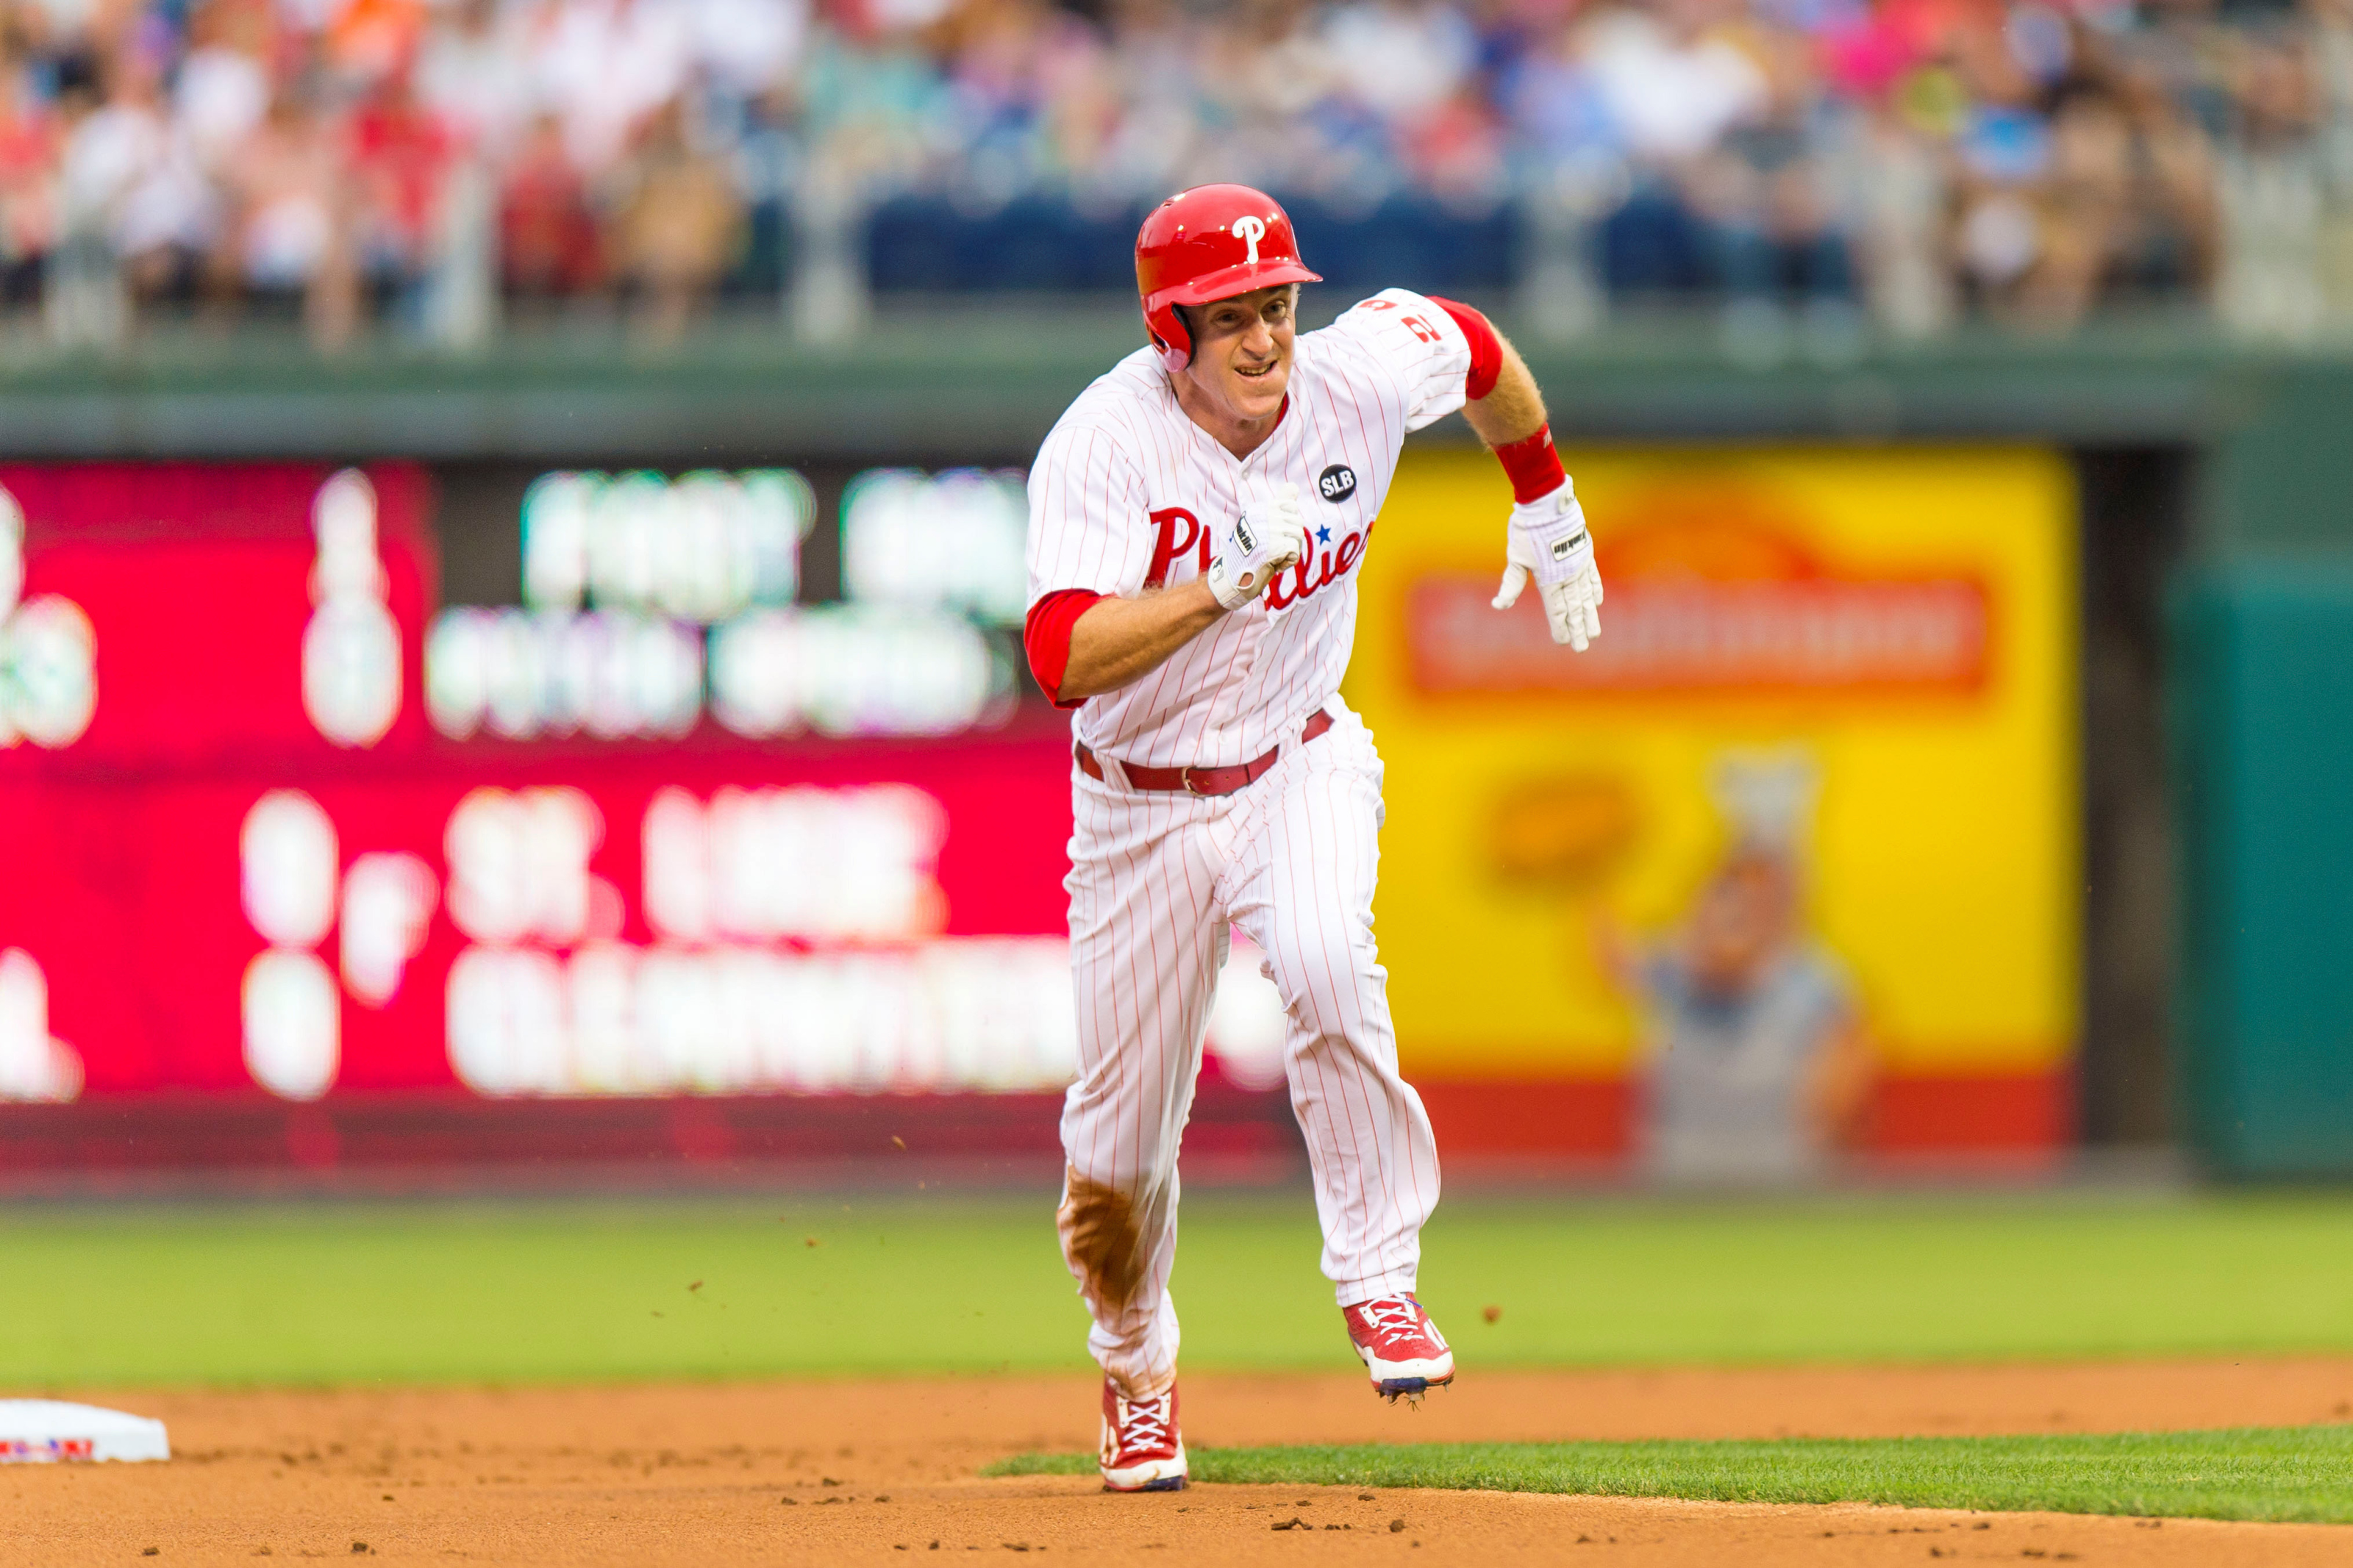 Chase Utley, content in retirement, looks forward to his